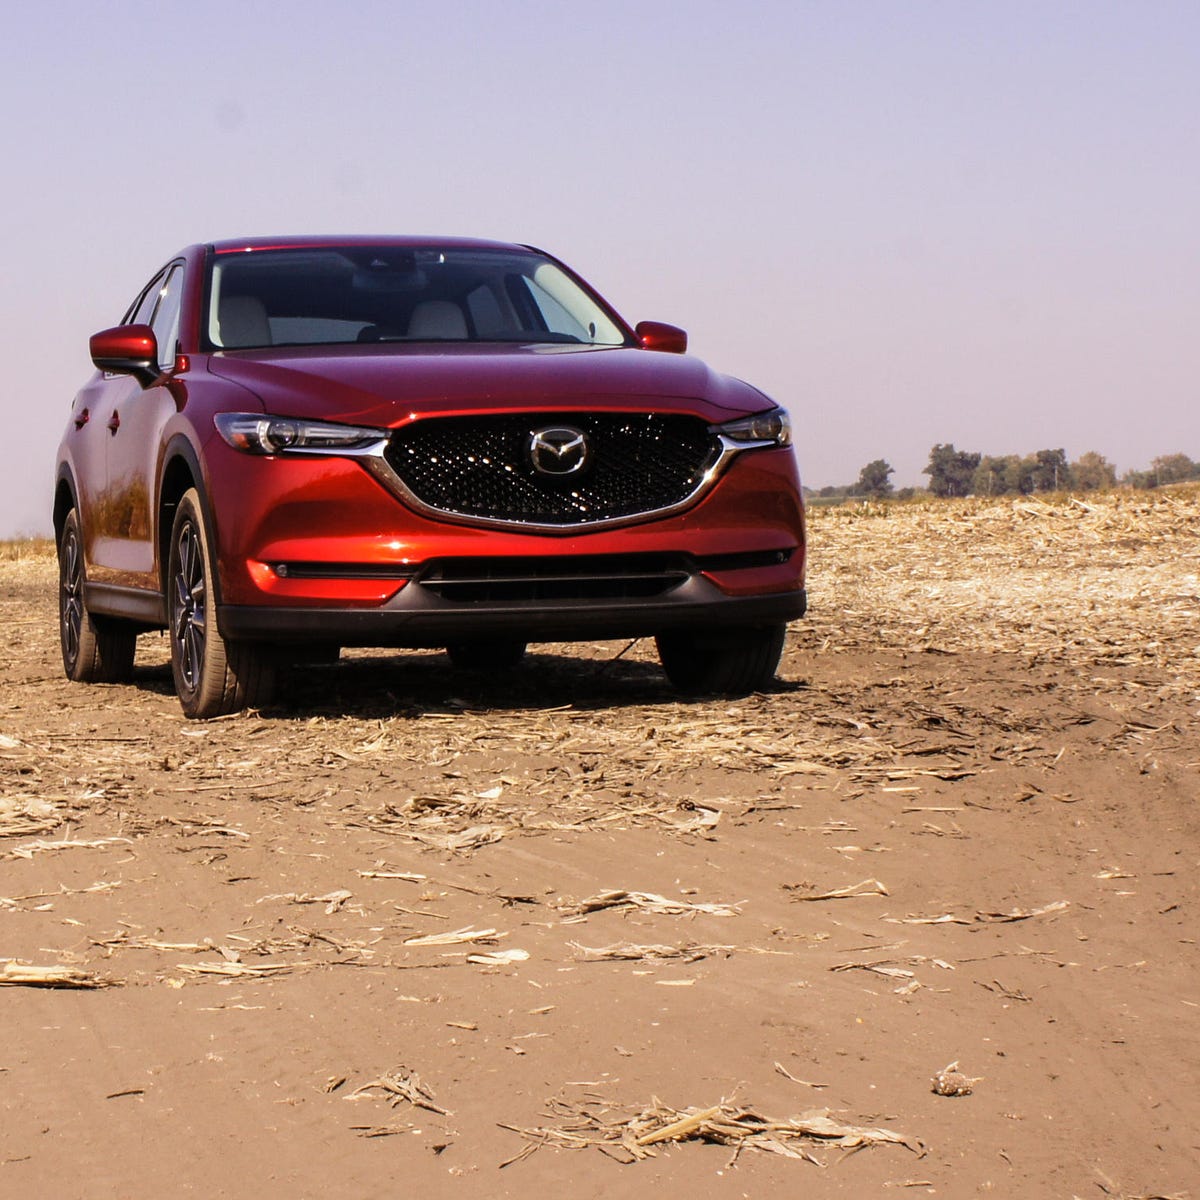 2017 Mazda CX-5 review: Mazda's small SUV aims at luxury class, retains  budget price - CNET